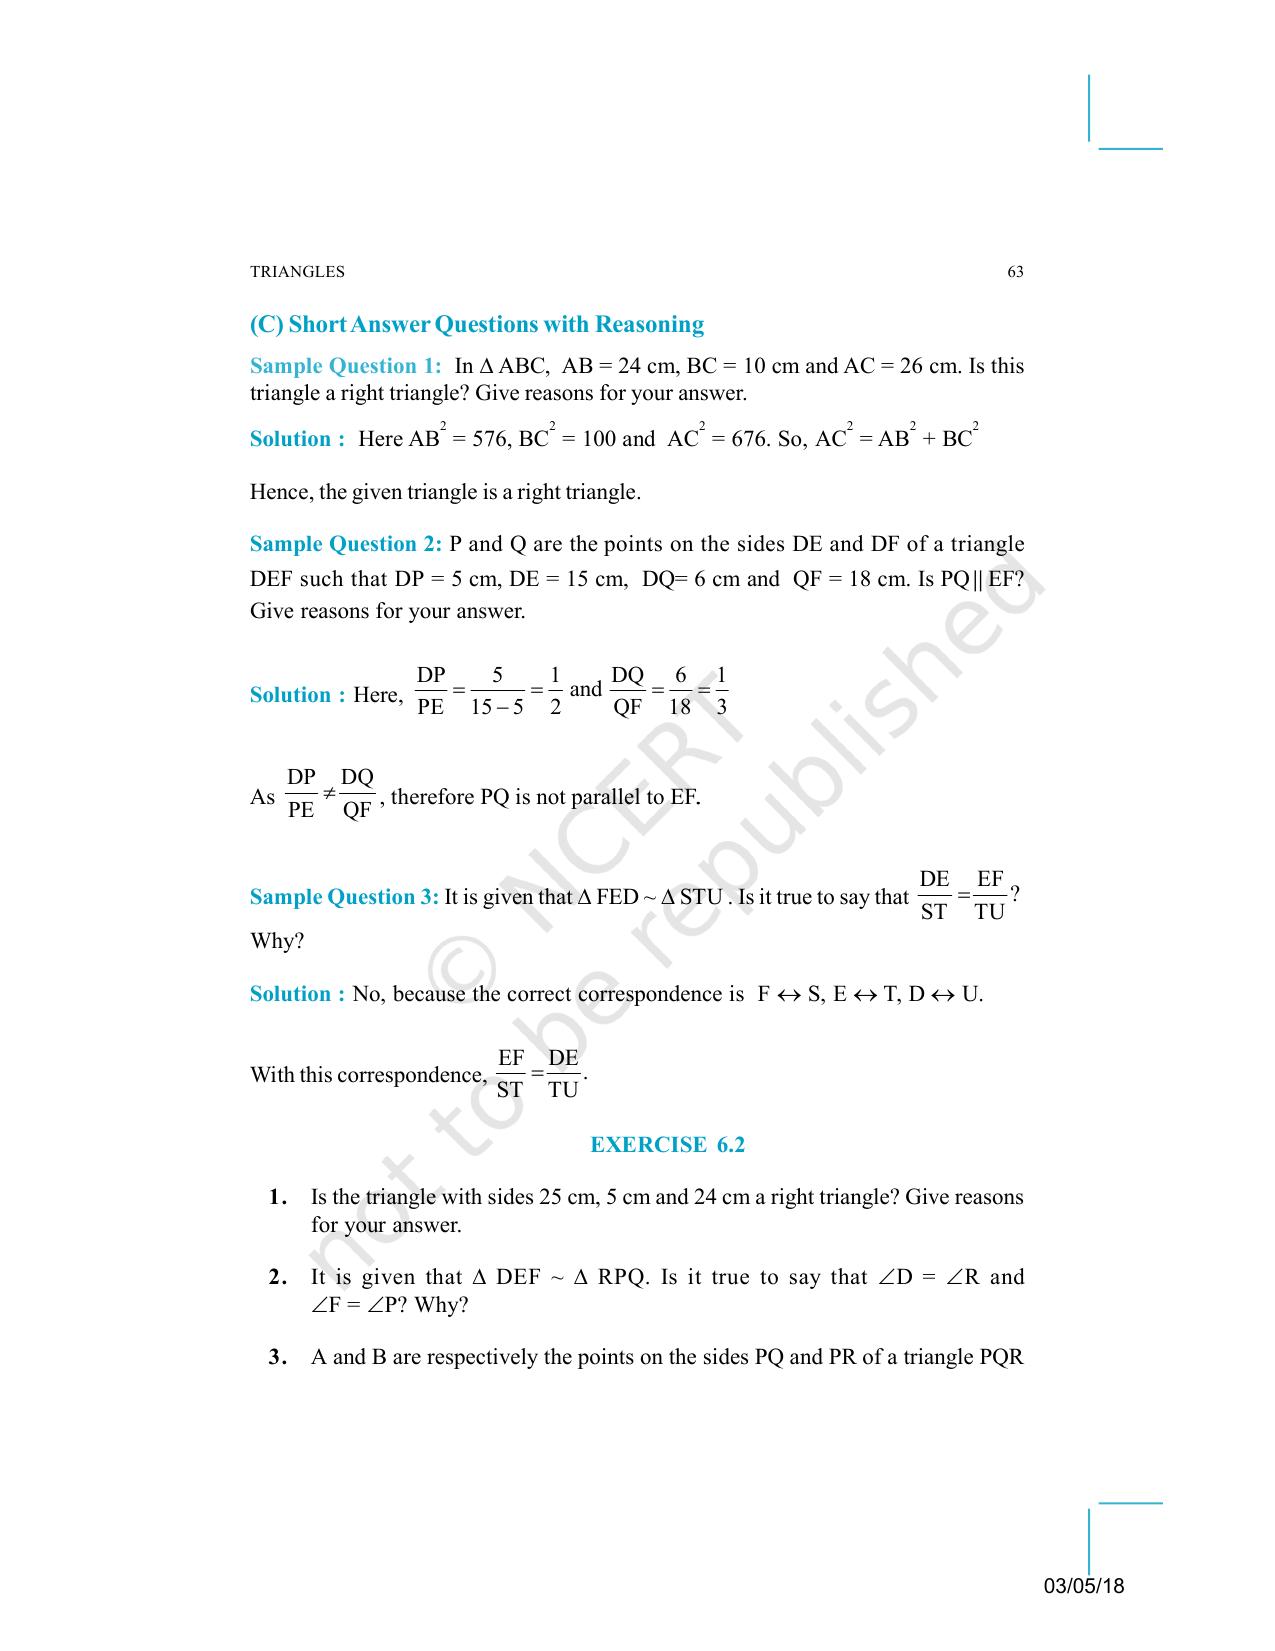 NCERT Exemplar Book for Class 10 Maths: Chapter 6 Triangles - Page 5